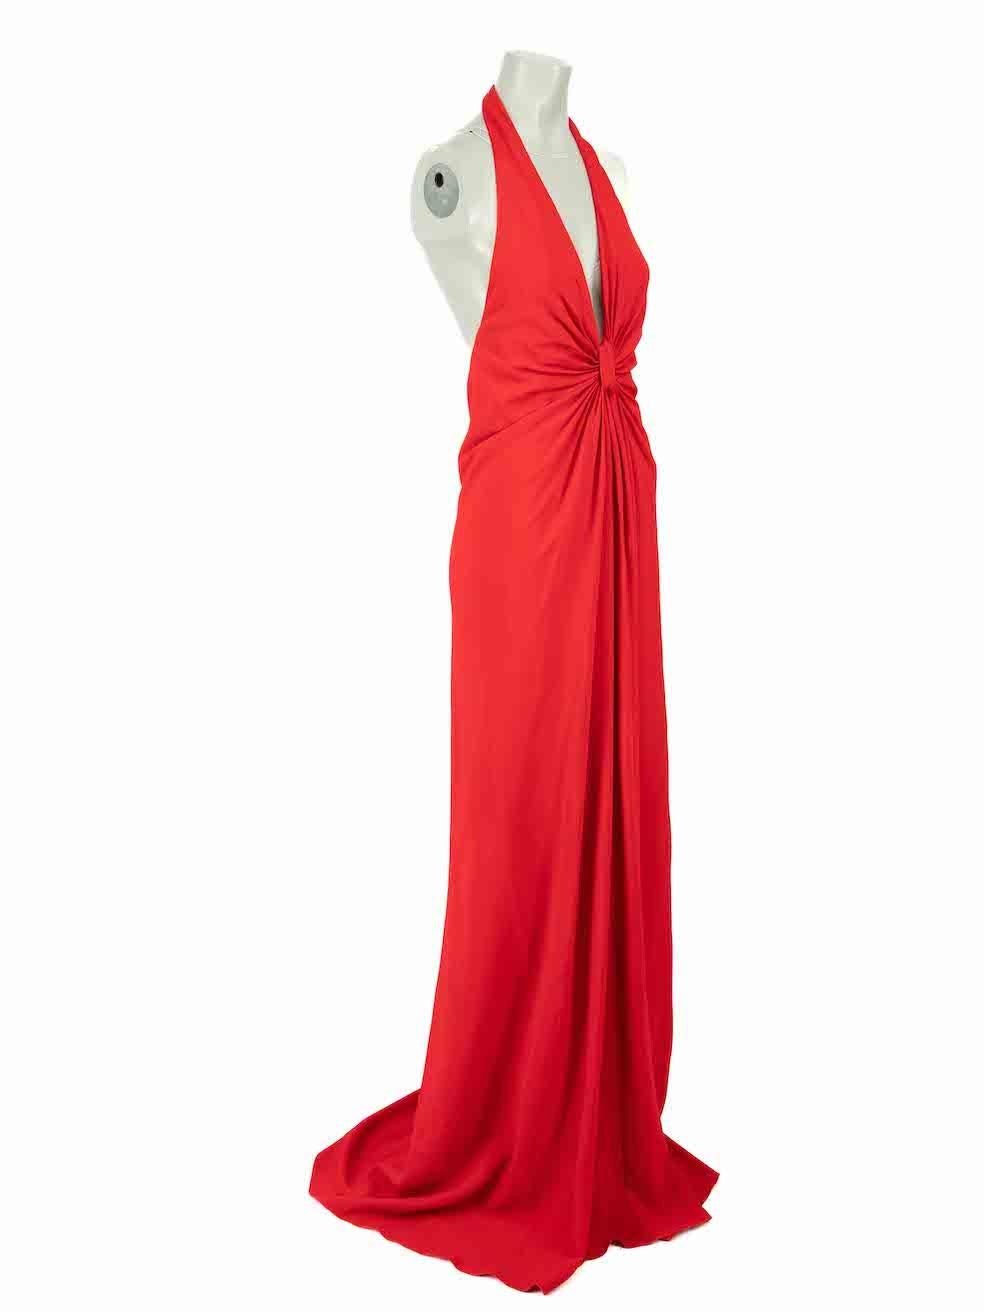 CONDITION is Very good. Hardly any visible wear to dress is evident on this used Valentino designer resale item.
 
Details
Red
Viscose
Gown
Halterneck
Maxi
Sleeveless
Open back
Back zip and hook fastening
 
Made in Italy

Composition 
97% Viscose,